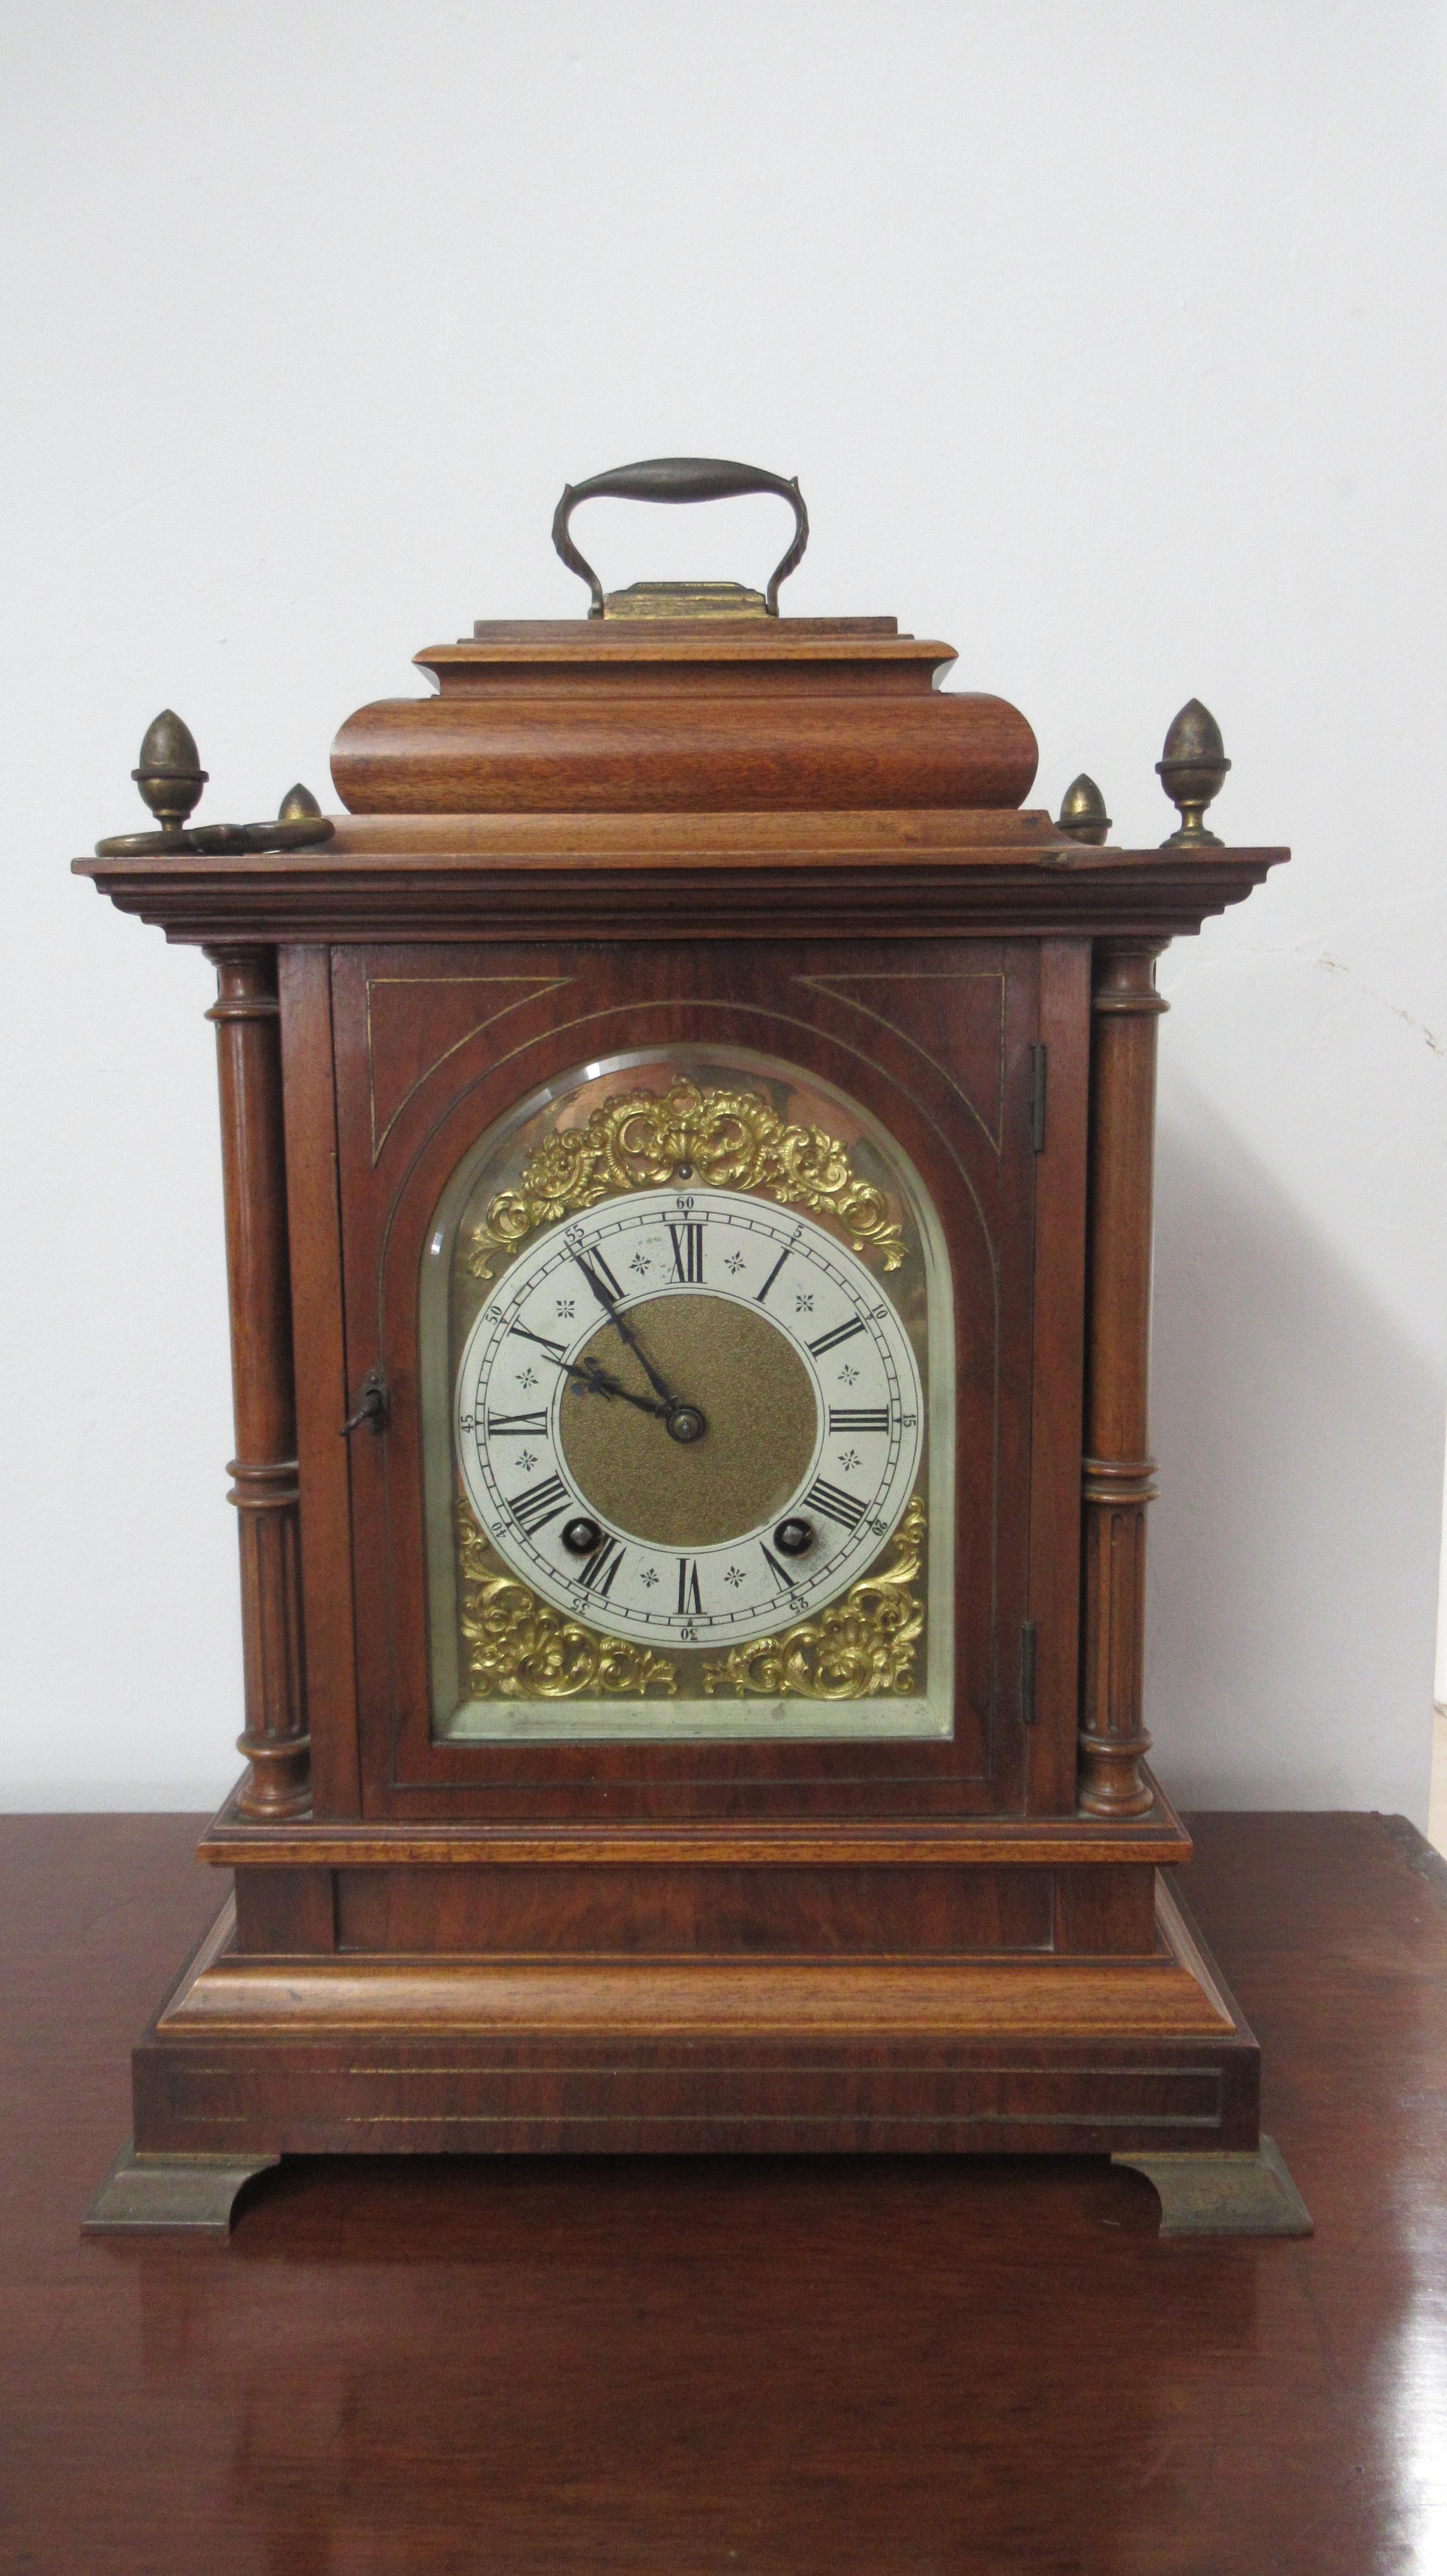 A Lenzkirch mahogany architectural 8 day mantel clock with brass dial on four brass feet with